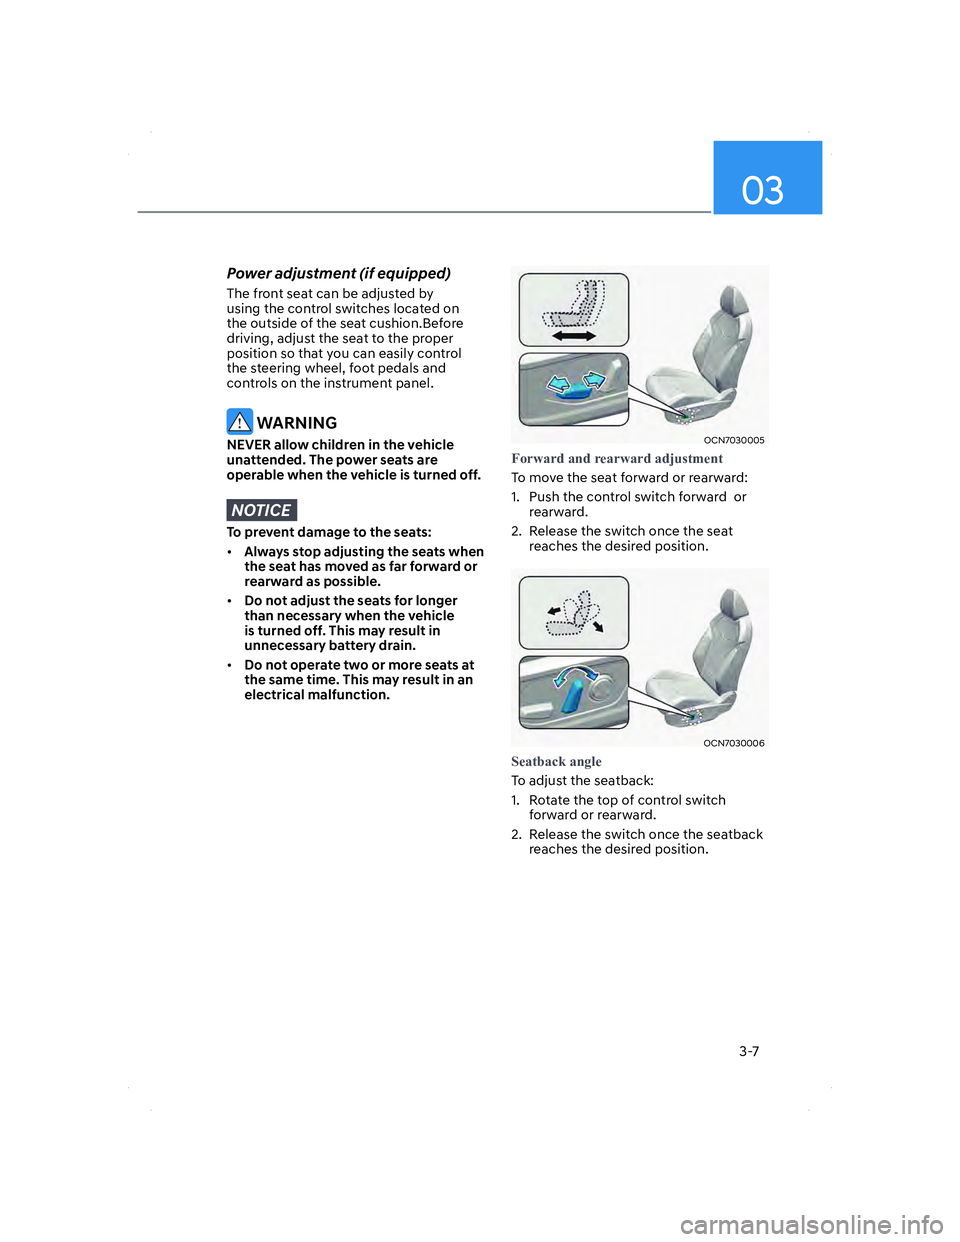 HYUNDAI ELANTRA 2022  Owners Manual 03
3-7
Power adjustment (if equipped) 
The front seat can be adjusted by 
using the control switches located on 
the outside of the seat cushion.Before 
driving, adjust the seat to the proper 
positio